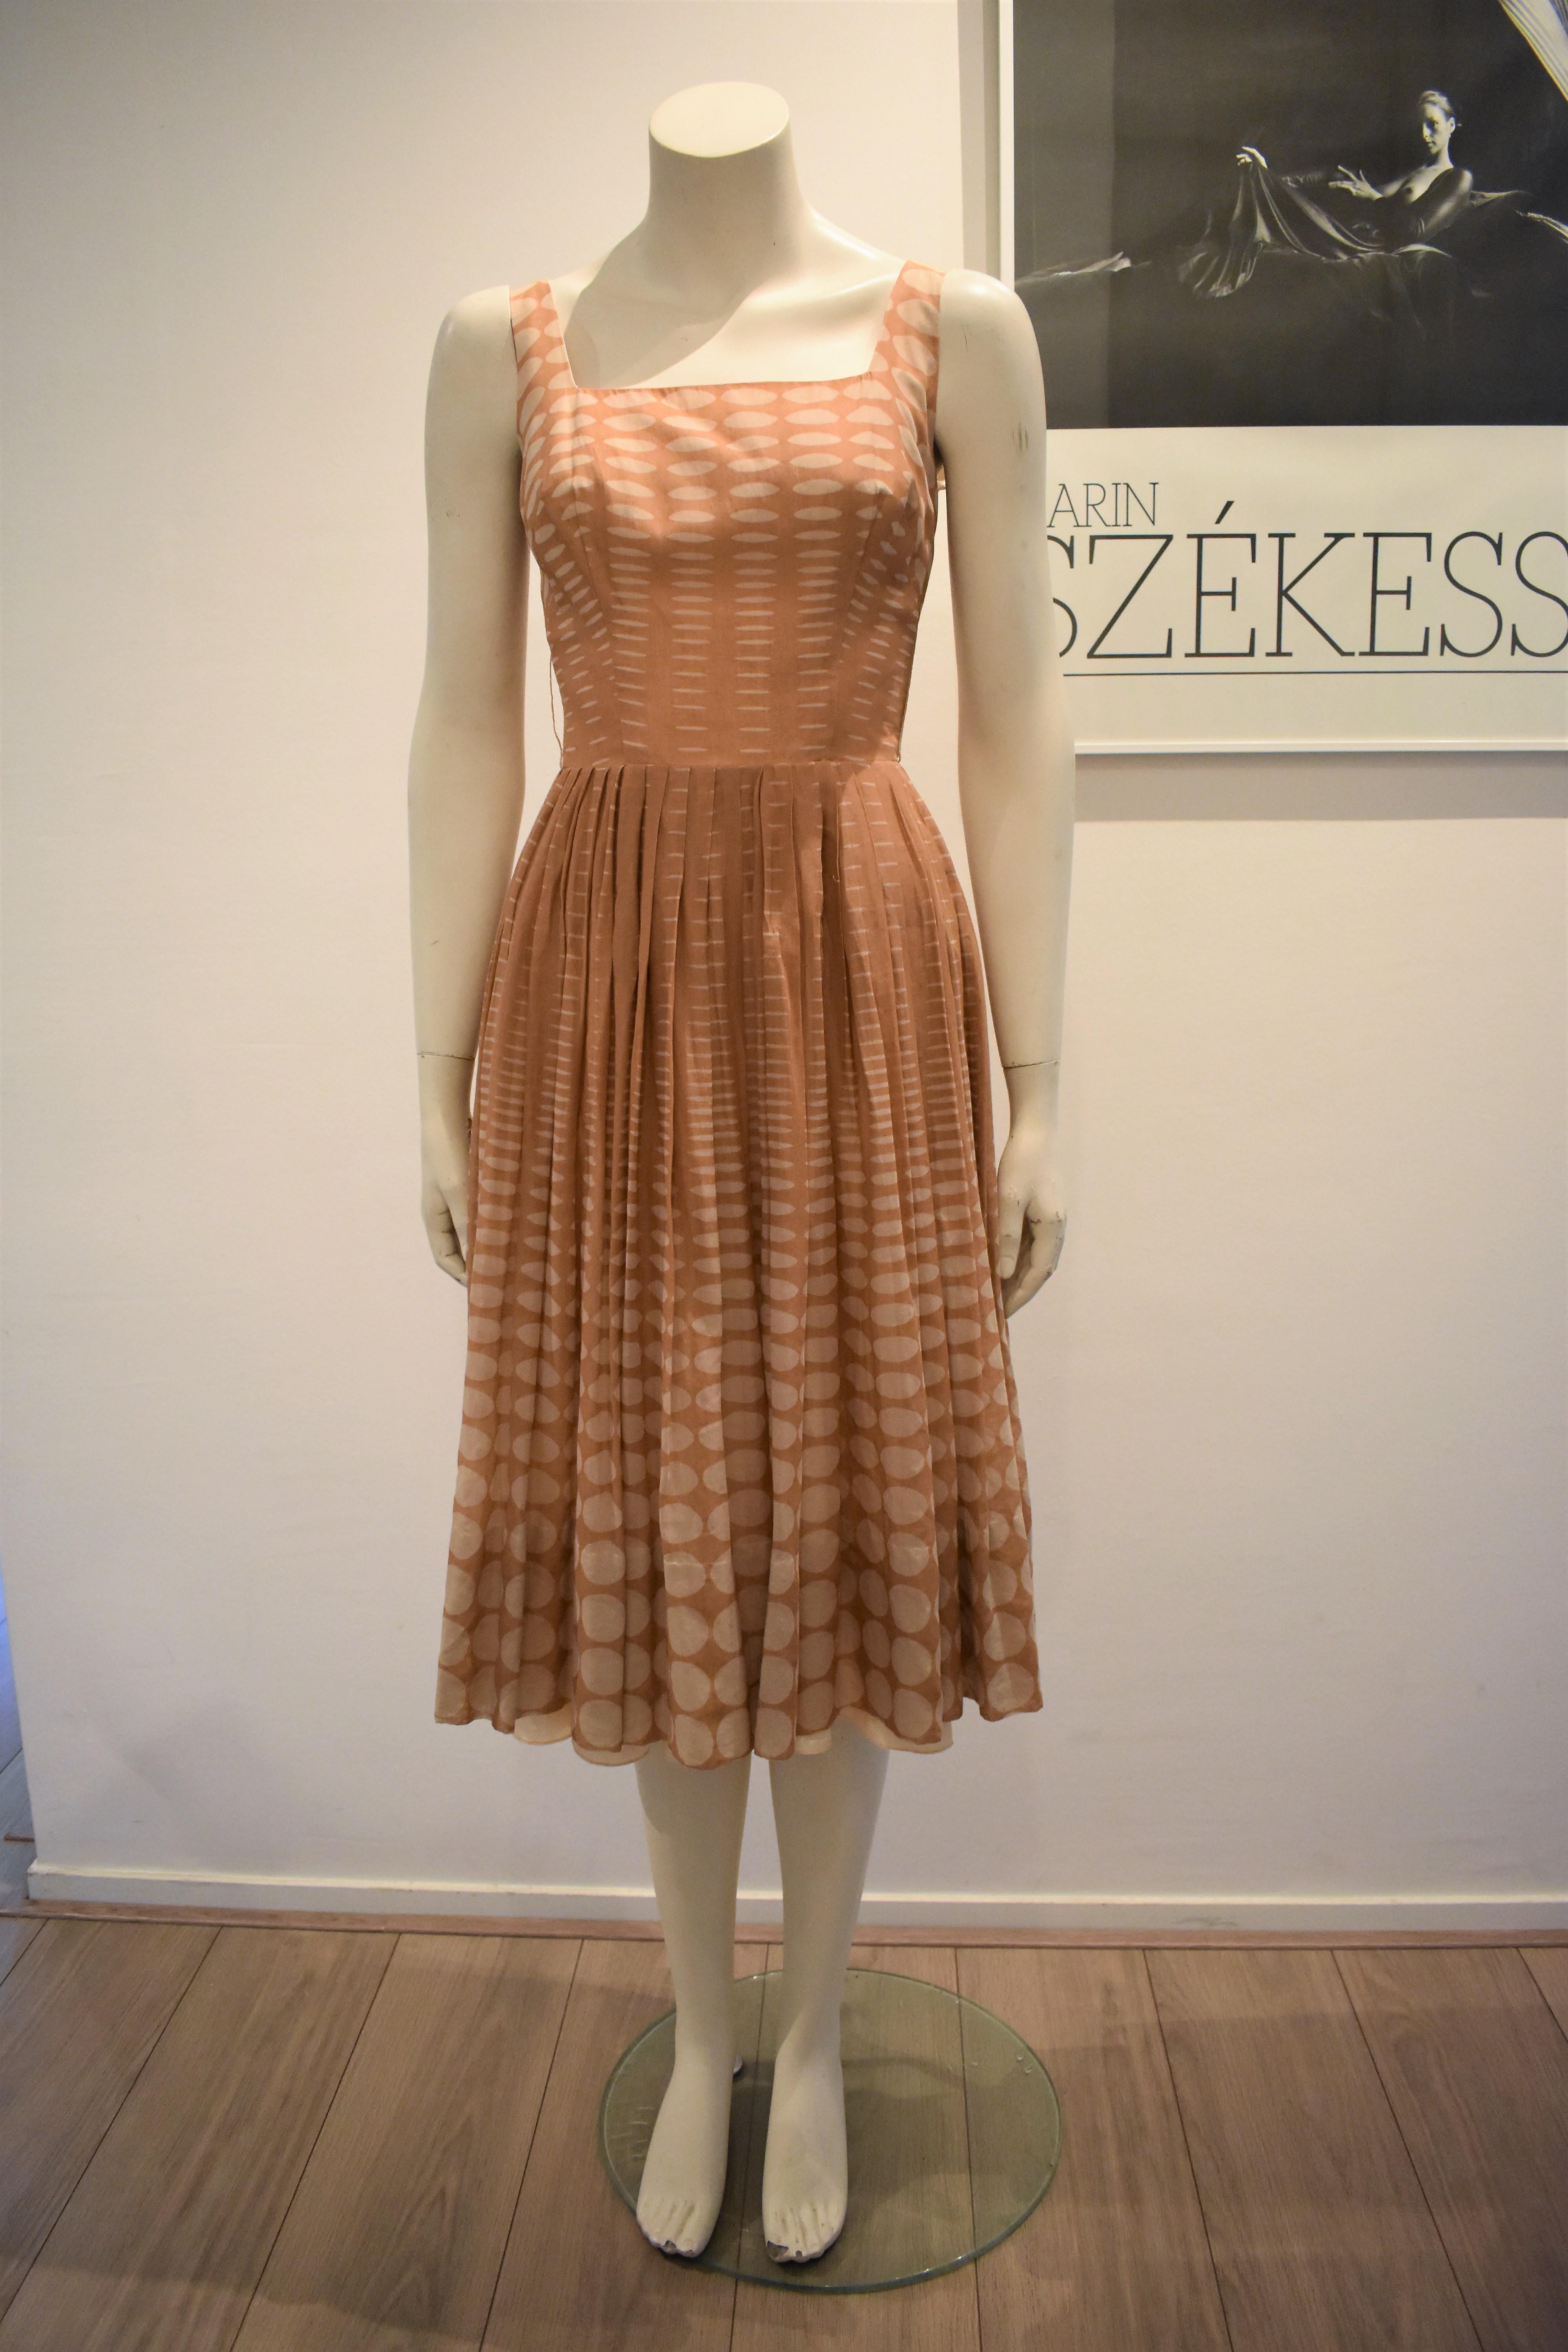 This lovely dress is made from batiste (a lightweight, semi-sheer cotton fabric) and it has a salmon slip dress underneath. The dress has a very tiny waist (the zipper could not completely close on the mannequin). The dress has 2 very thin belt